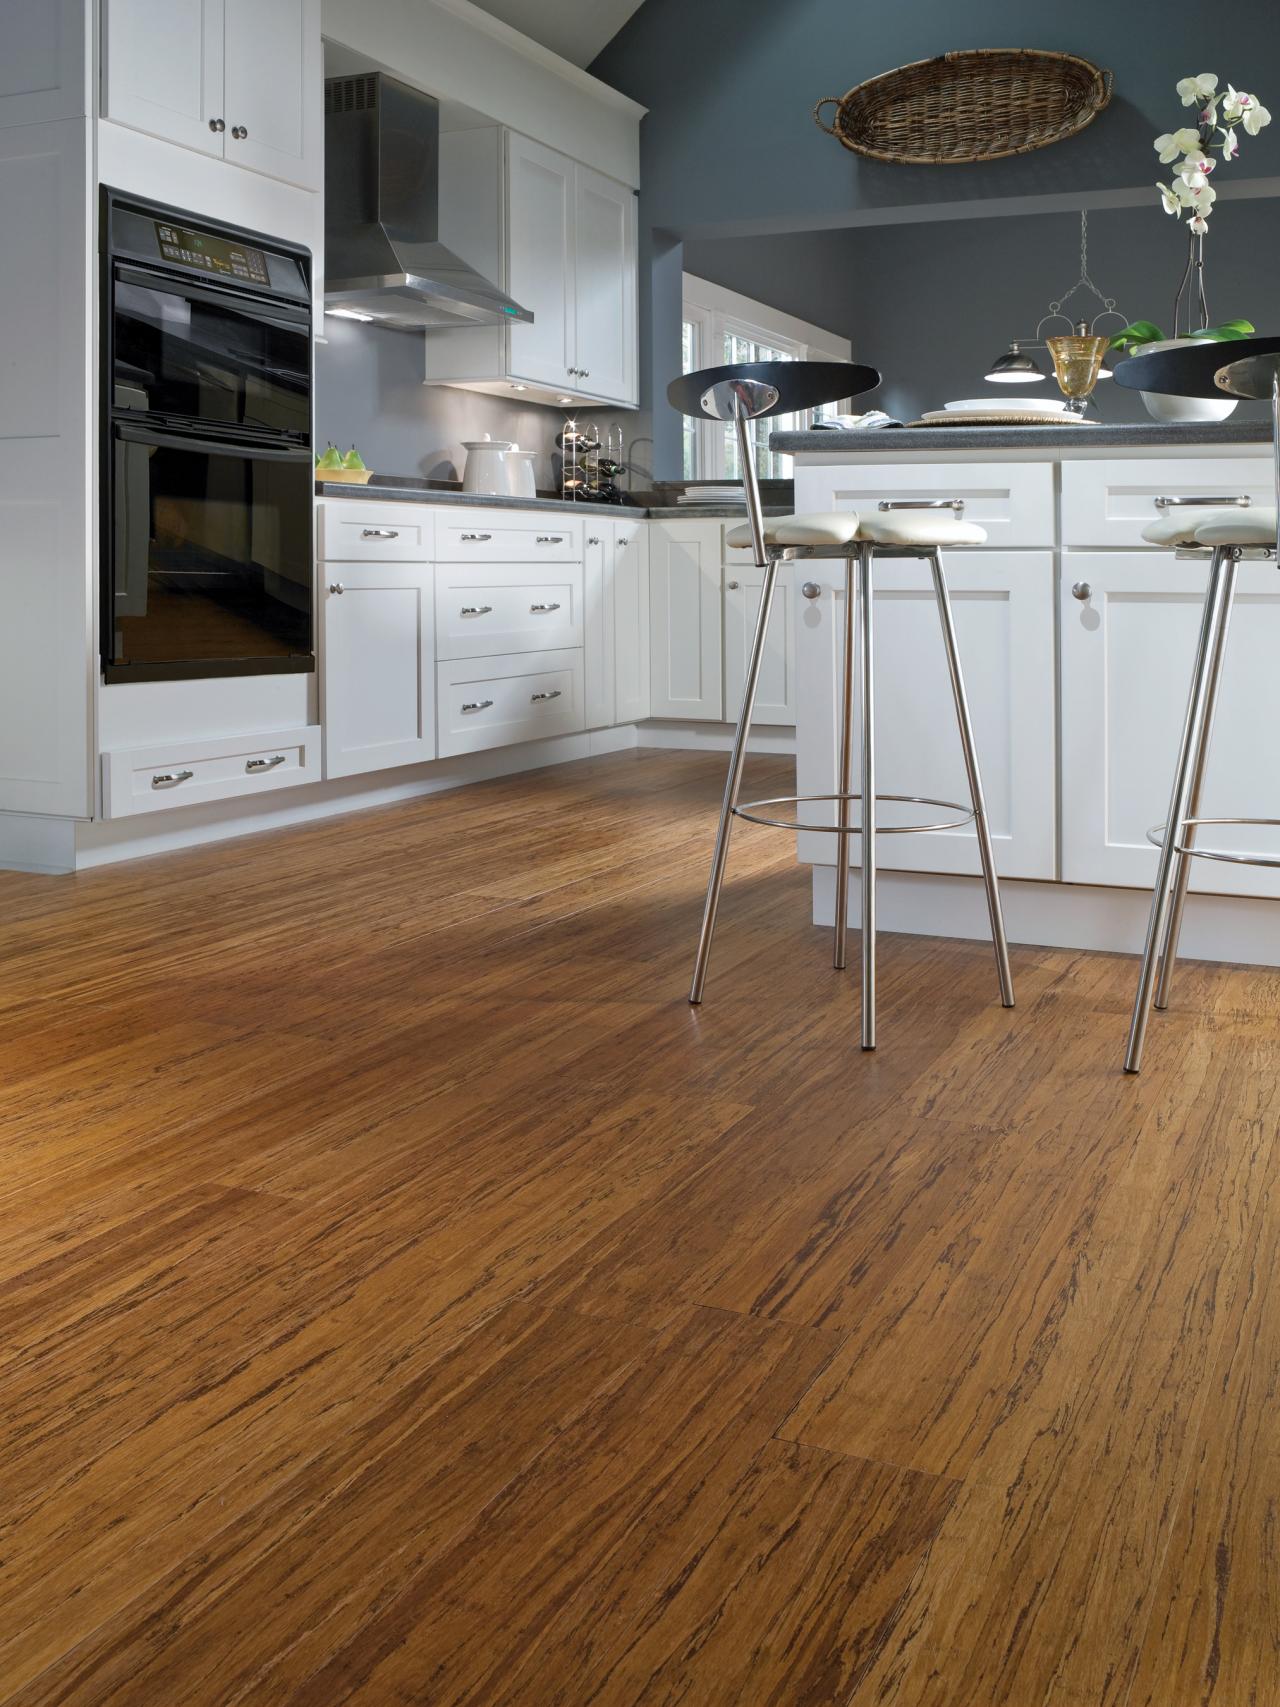 Pros And Cons Of Bamboo Flooring, Why Bamboo Flooring Is Best